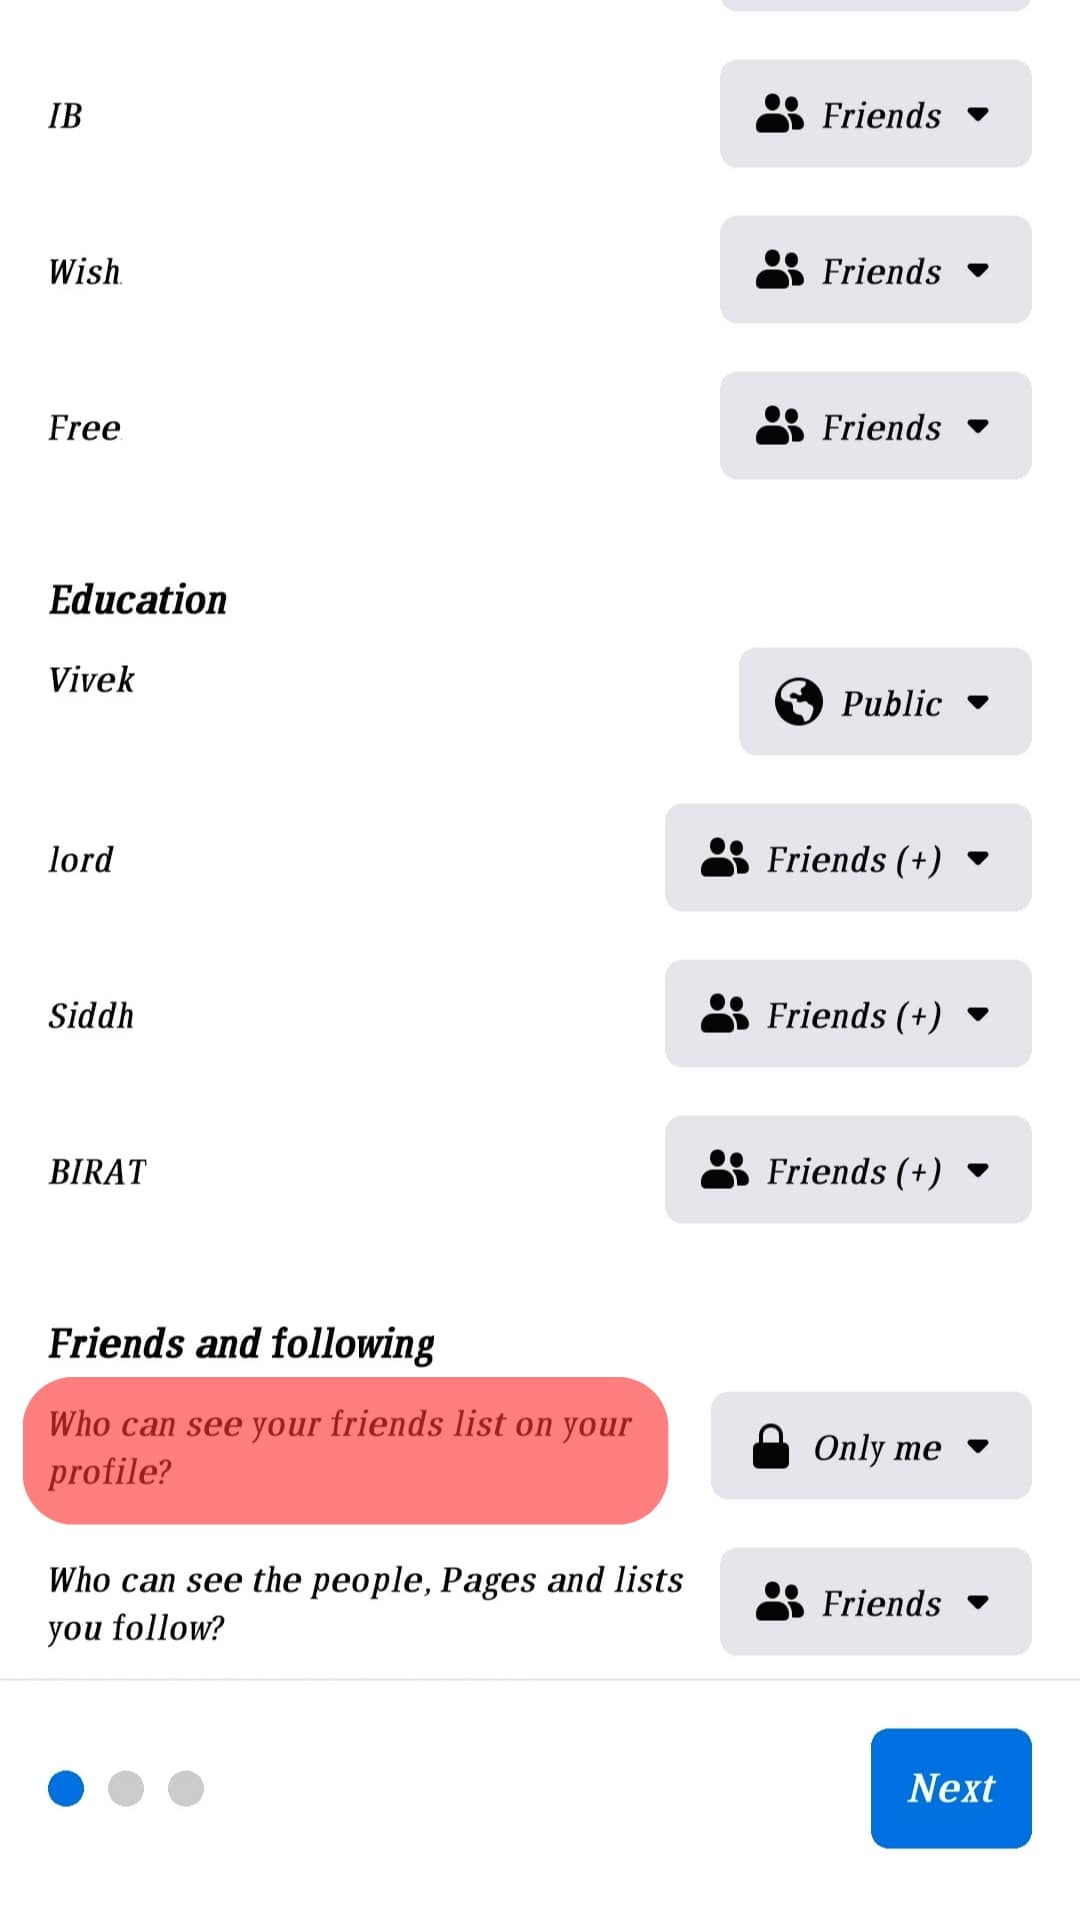 Who Can See Your Friends List